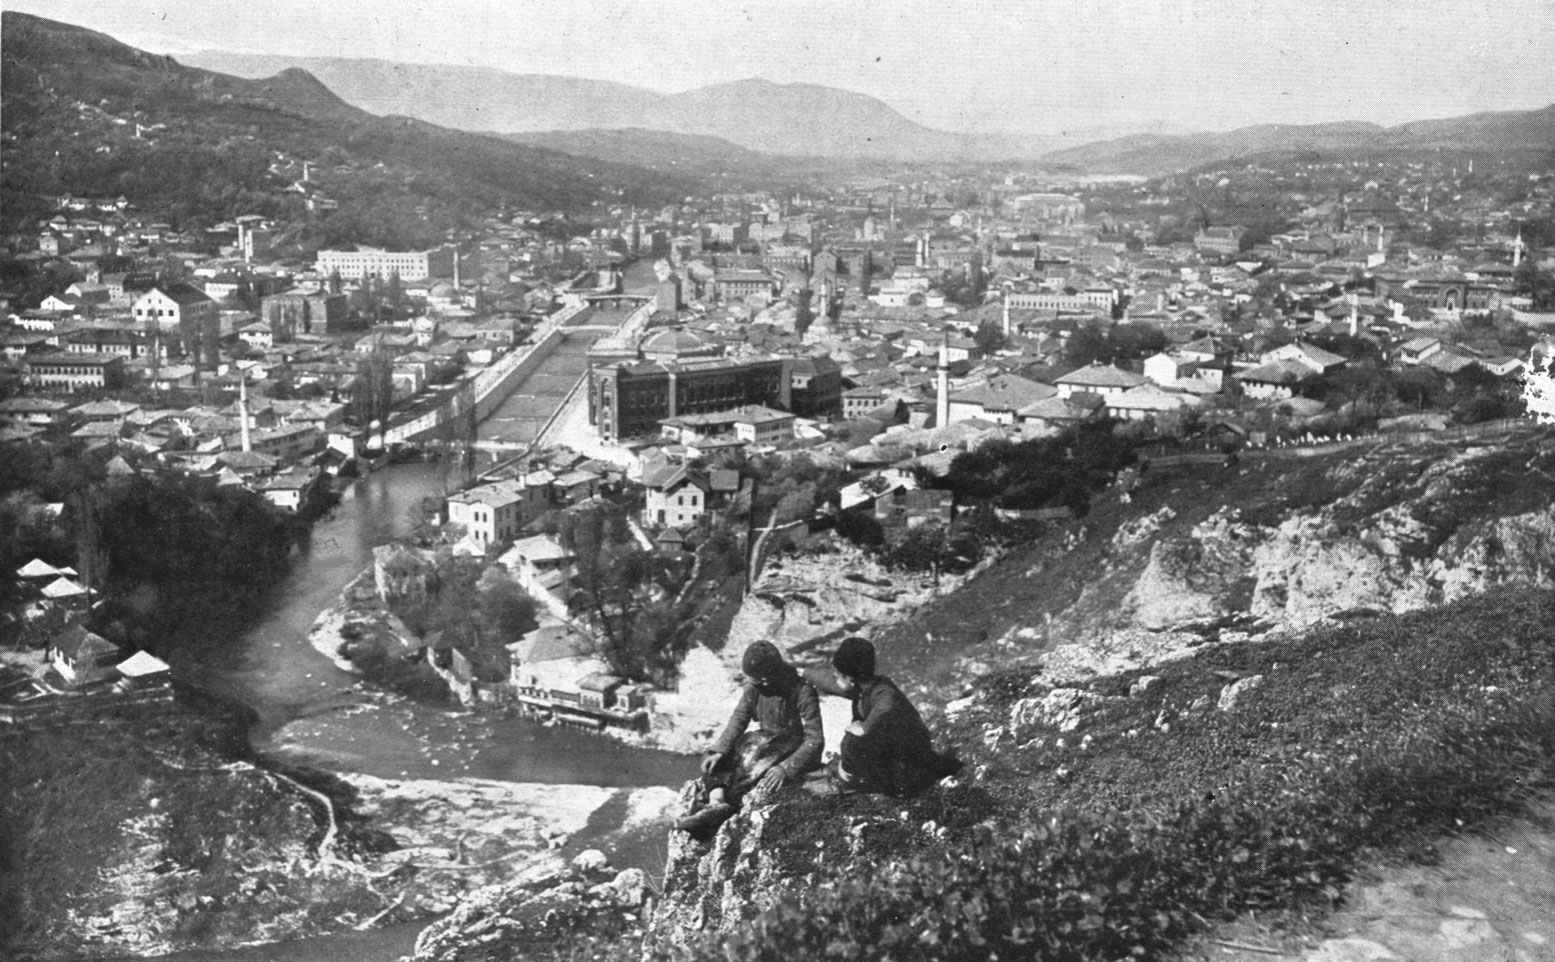 The Post-WWI Migrations That Built Yugoslavia and Turkey Have Left a Painful Legacy